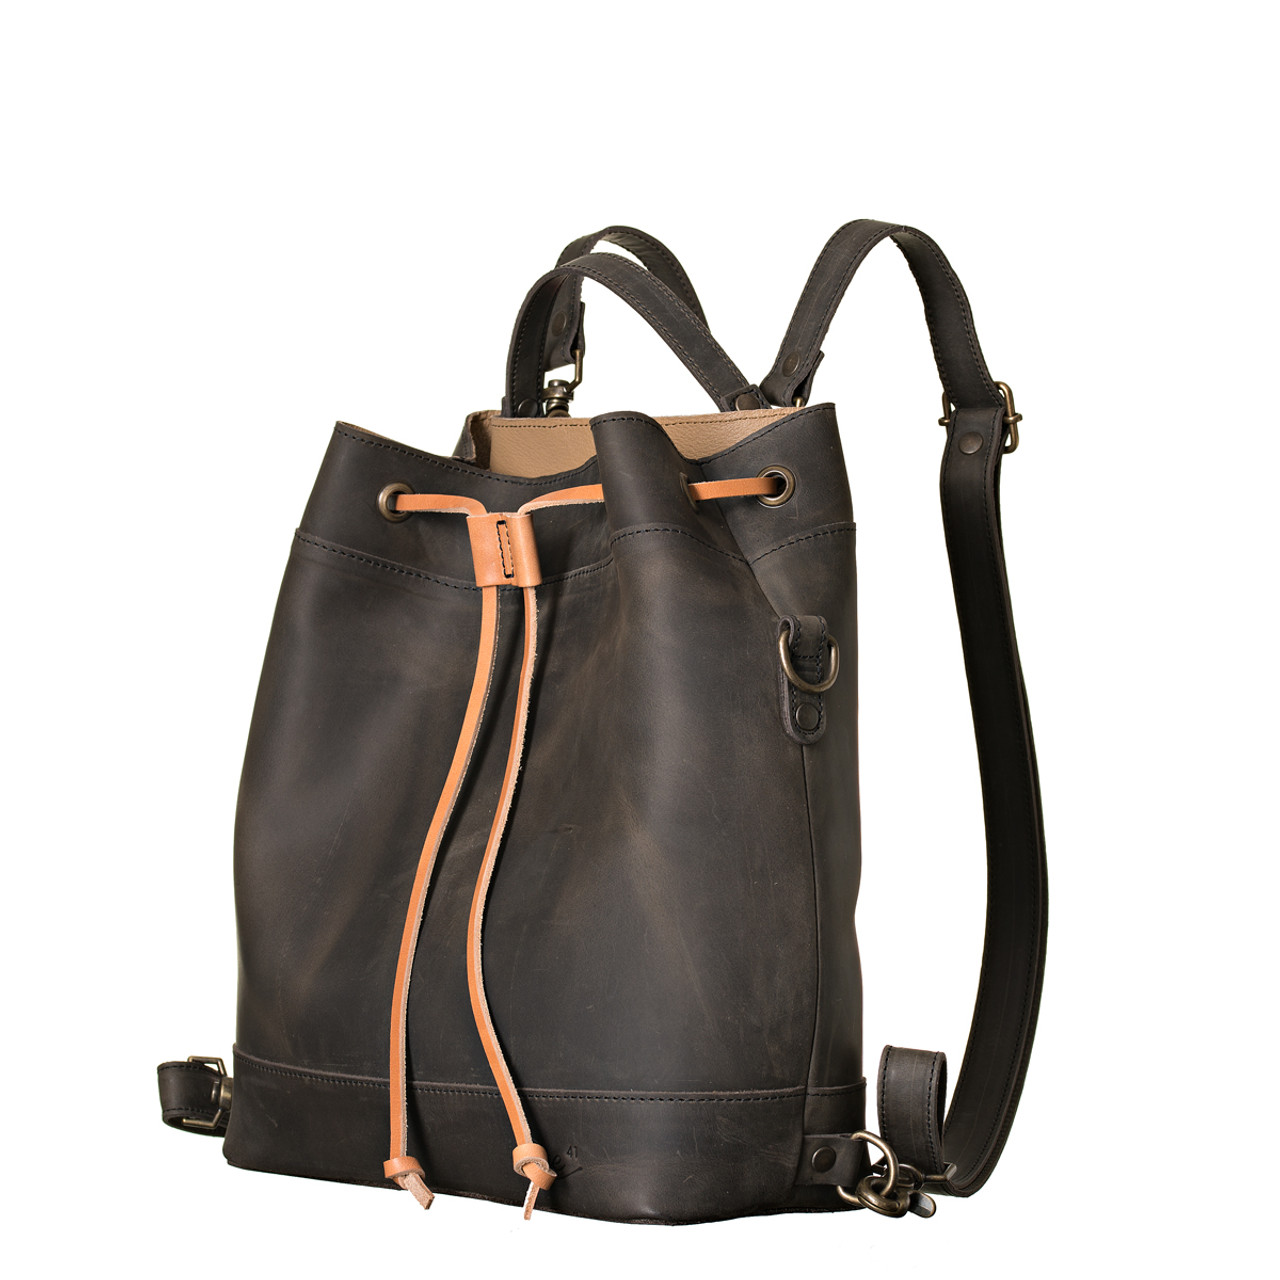 Leather Bucket Bag Leather Backpack Purse Leather Bag 